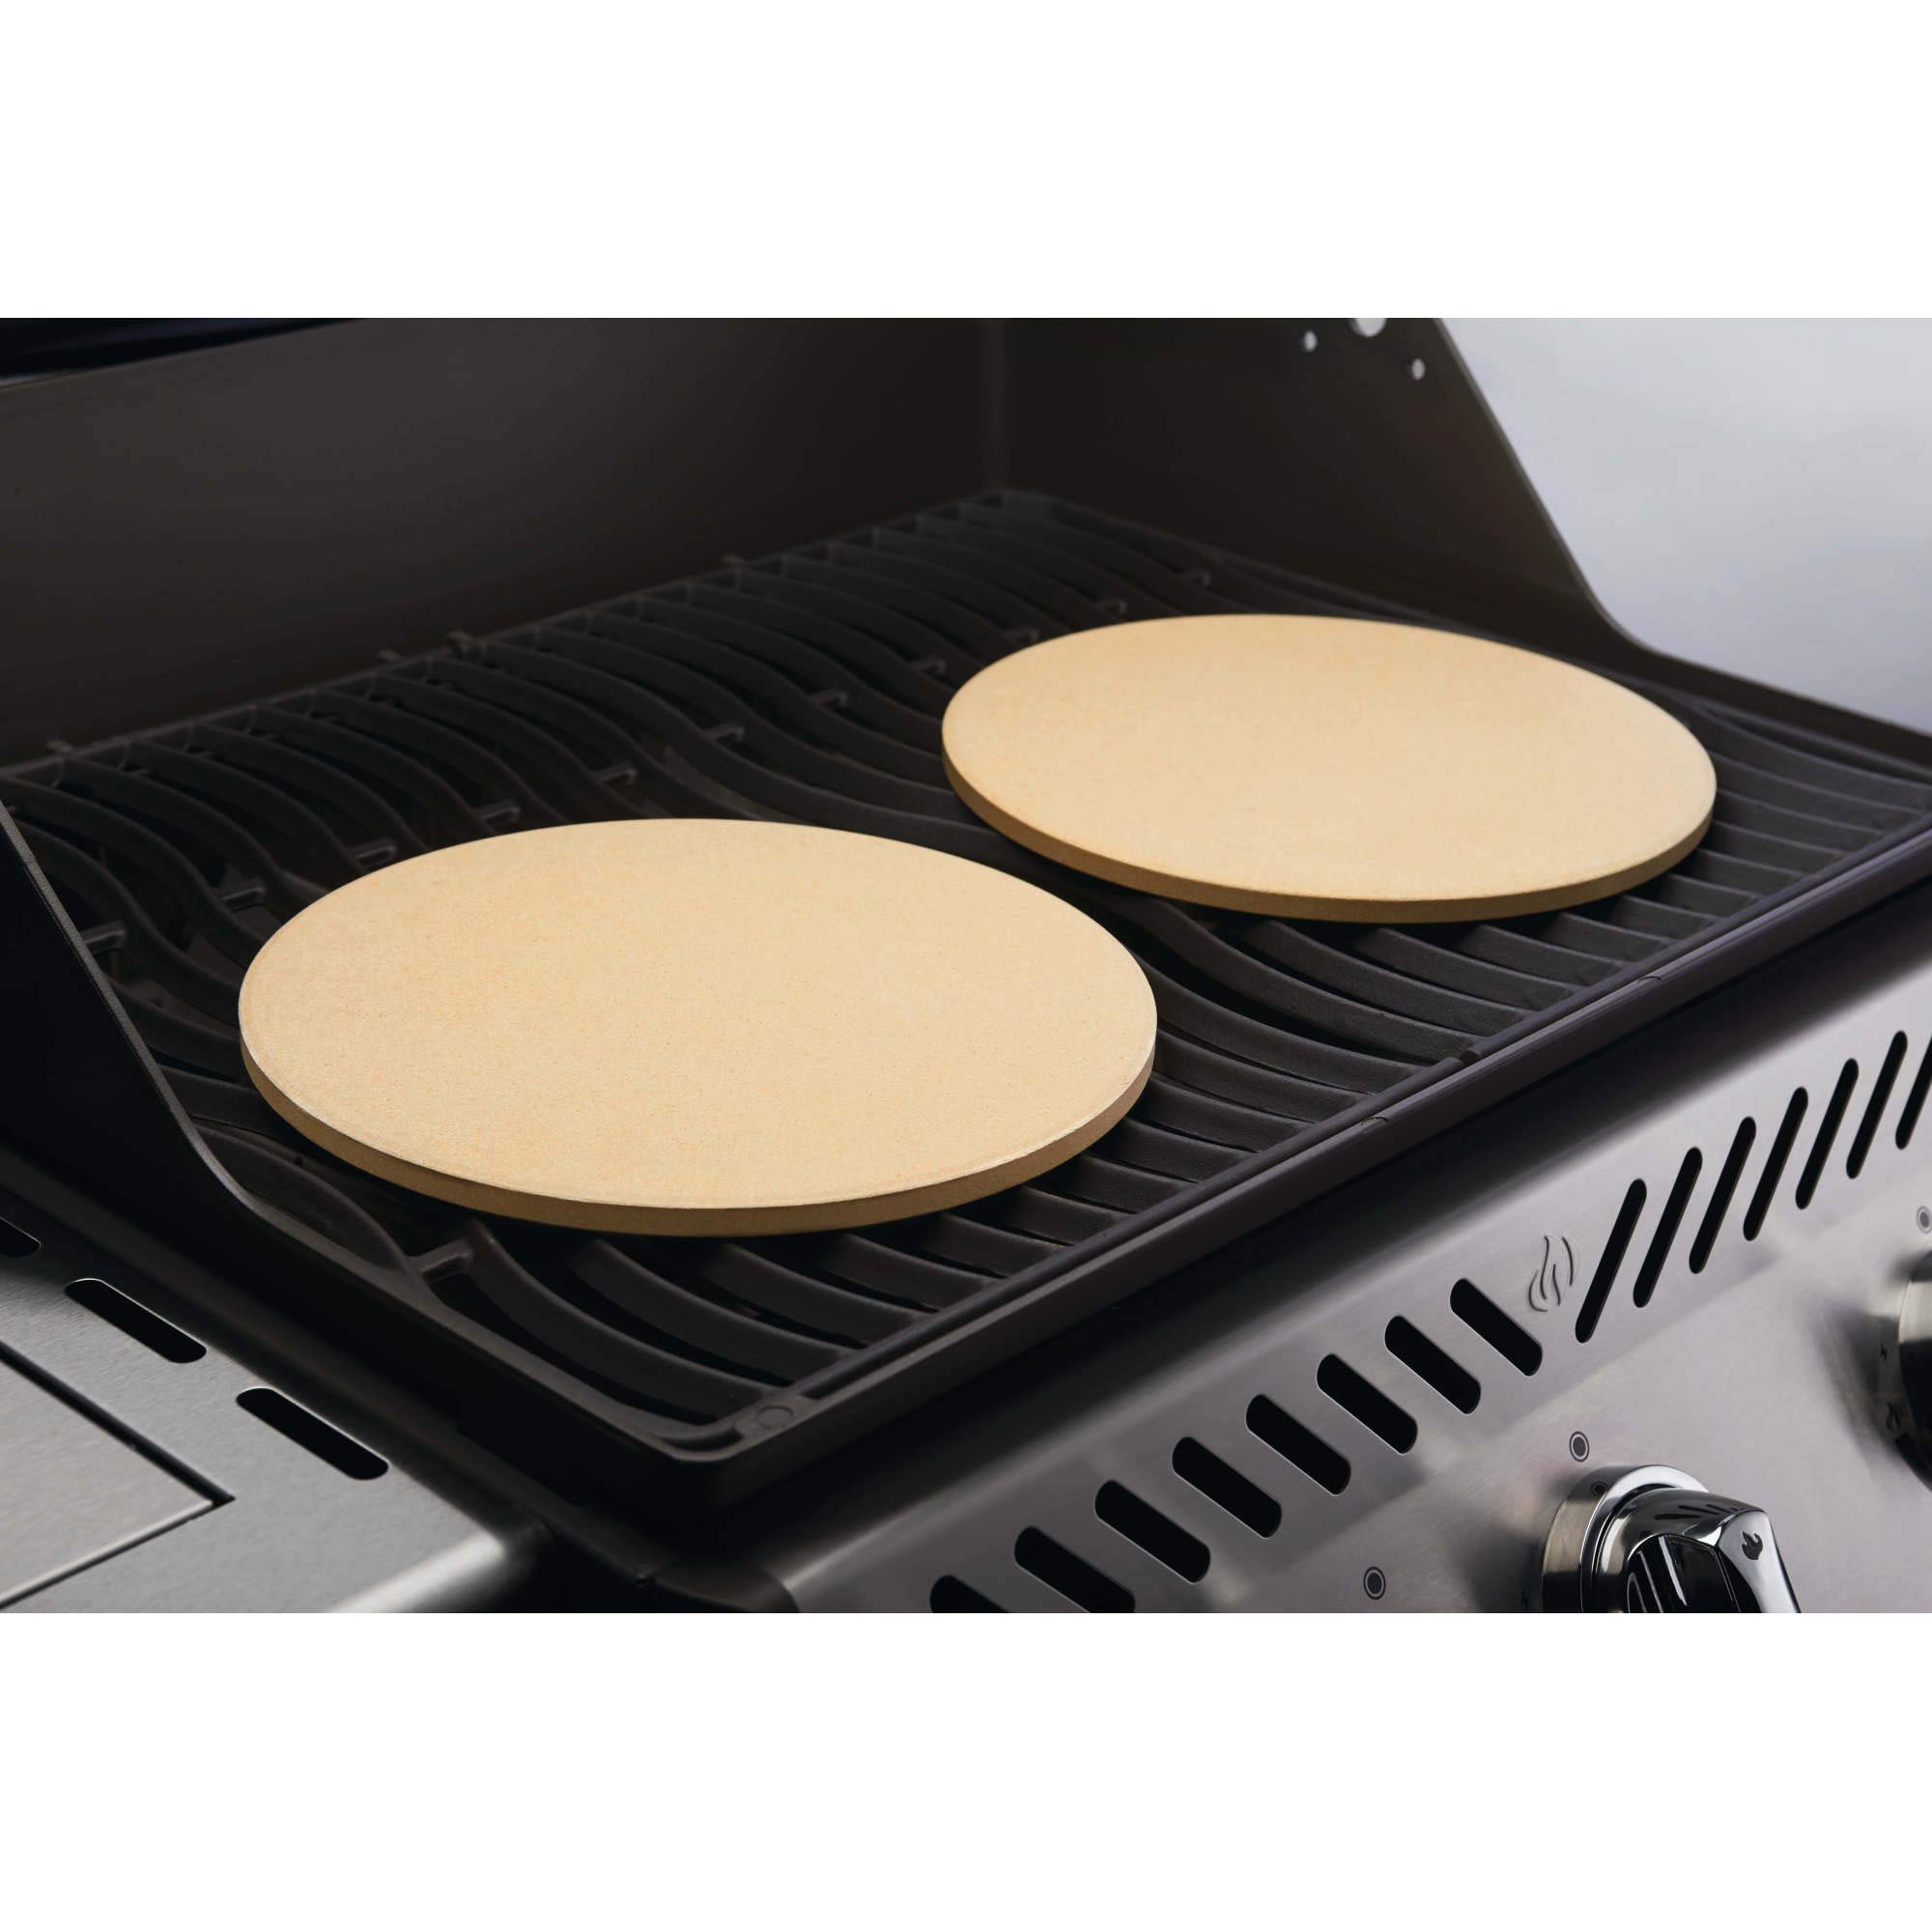 Napoleon Personal Sized Pizza Baking Stone Set - BBQ Grill Accessories, Two 10-inch Personal Pizza Baking Stones, Stone Oven Pizza, Pizzaria Results, Easy To Use, Use In BBQ Grill or Oven